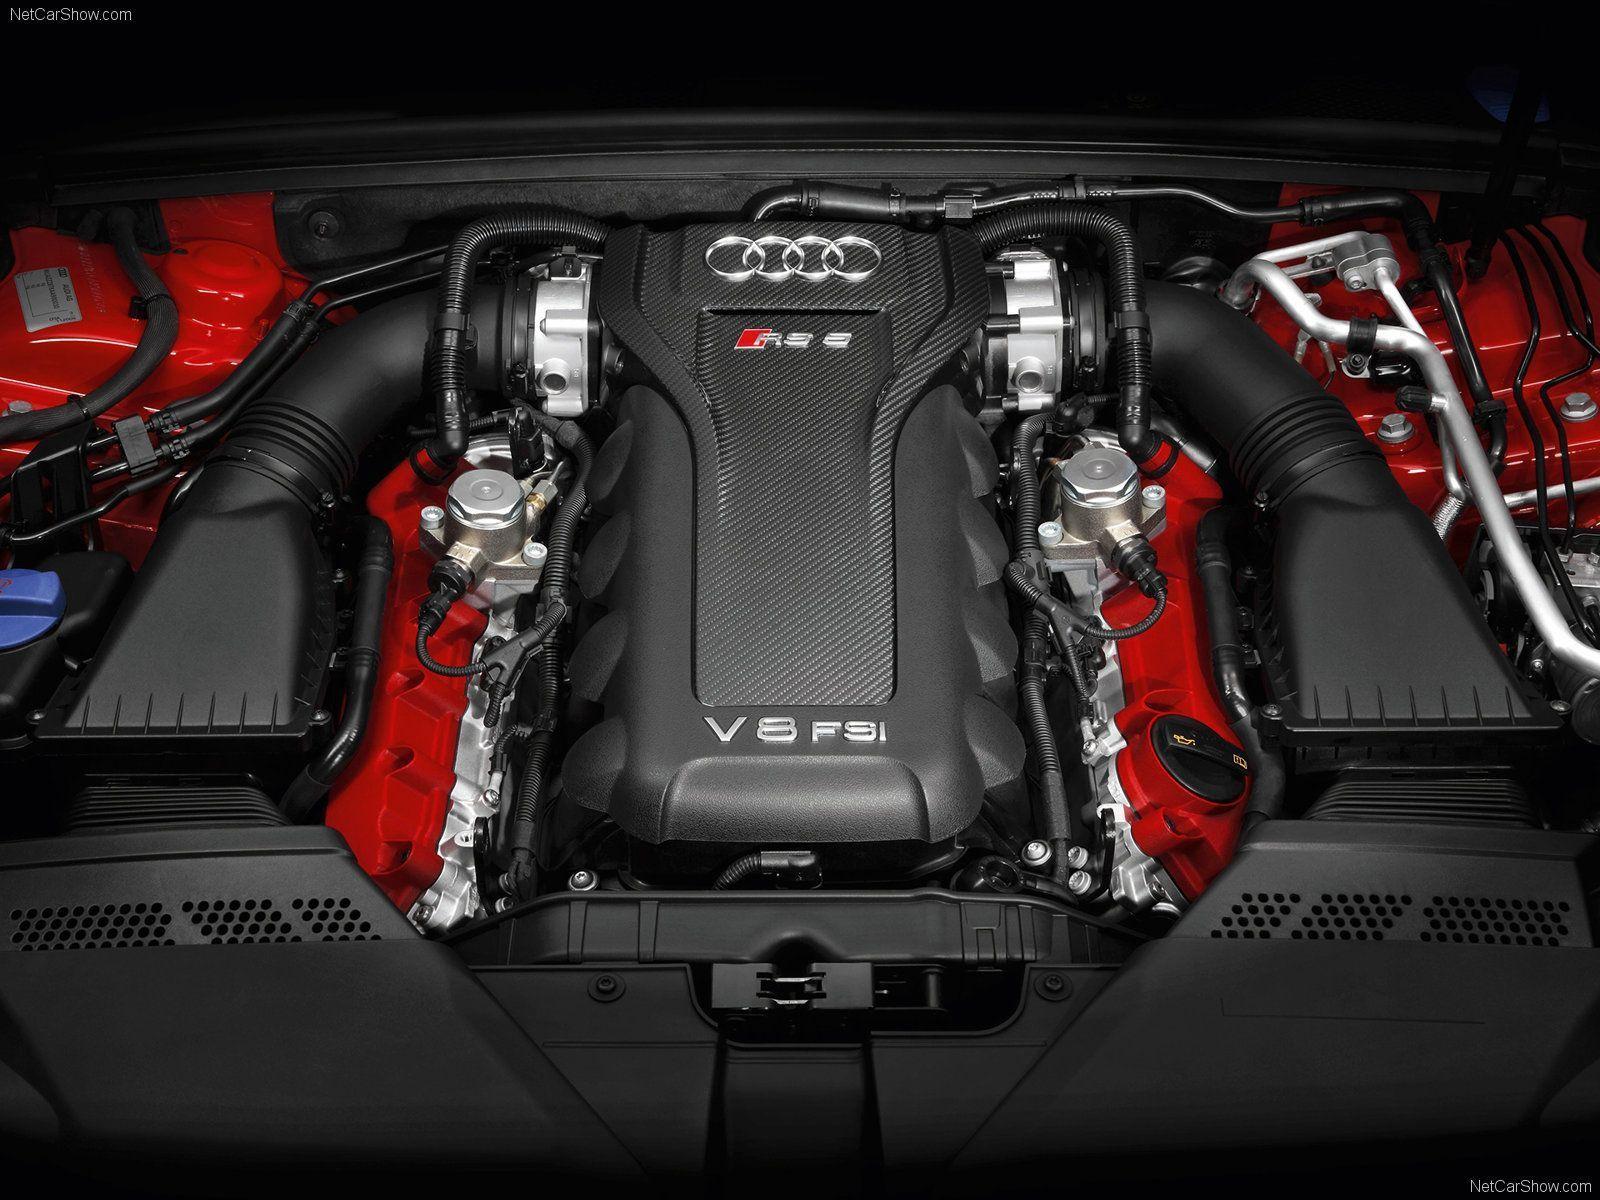 Audi RS5 picture # 72317. Audi photo gallery